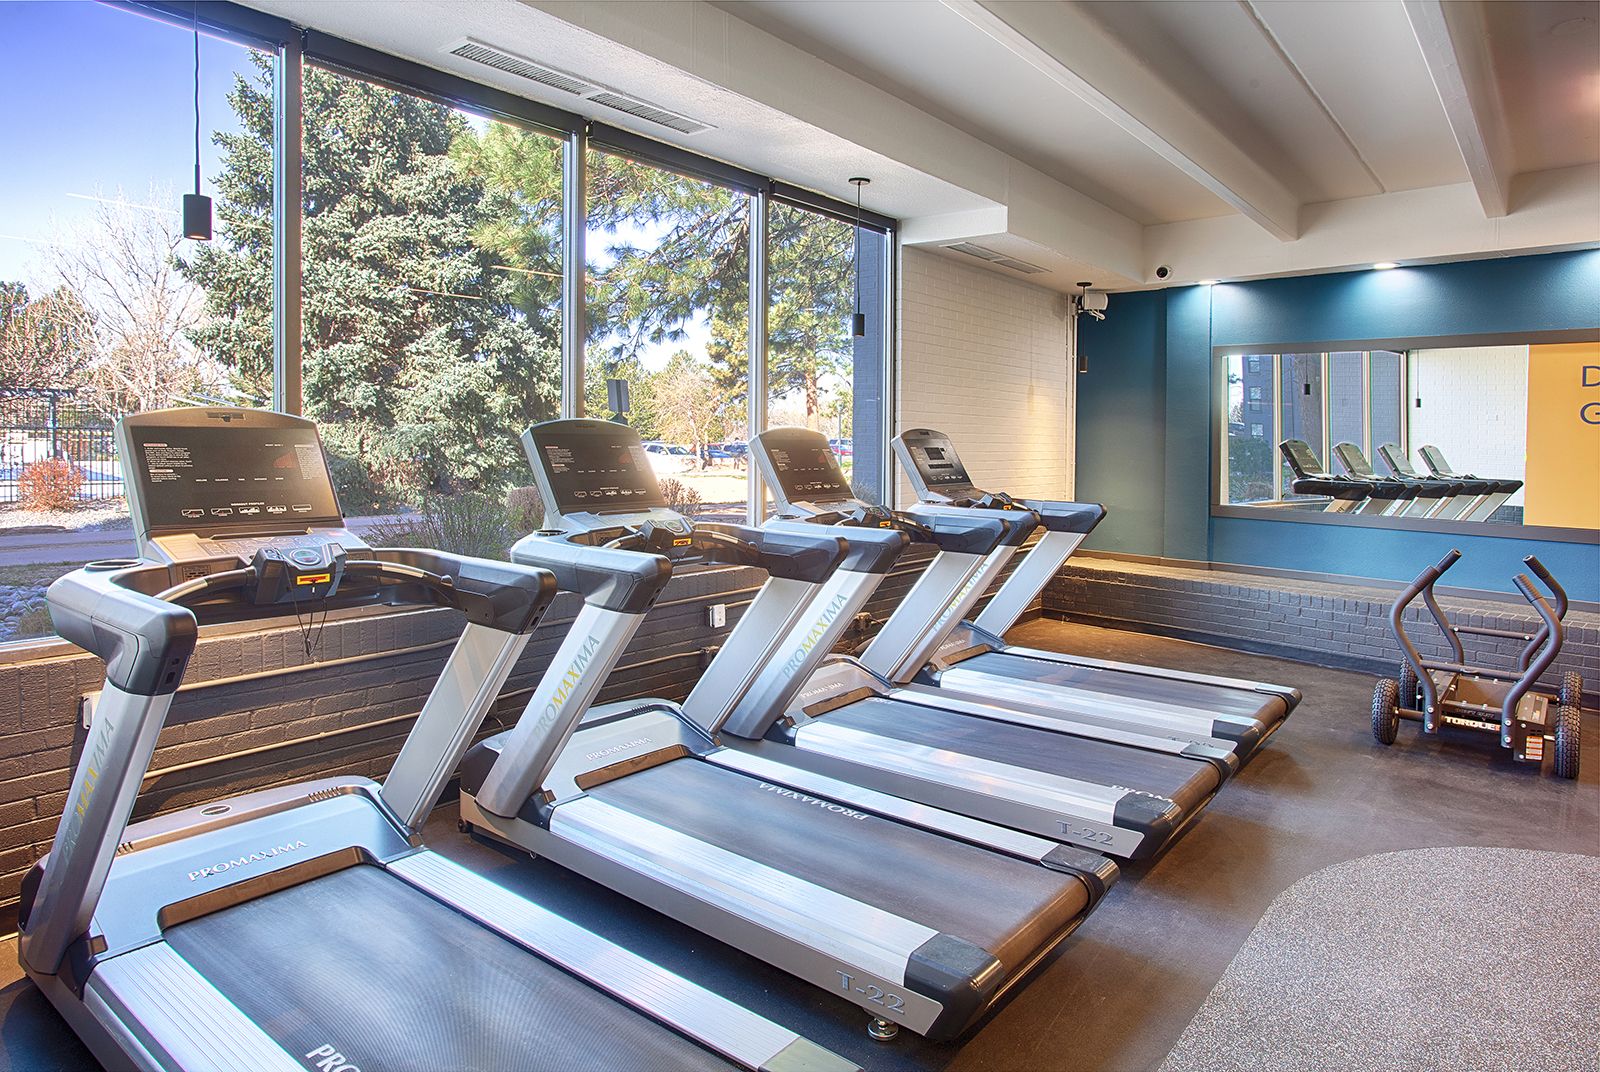 a row of treadmills with screens in a fitness center in front of windows